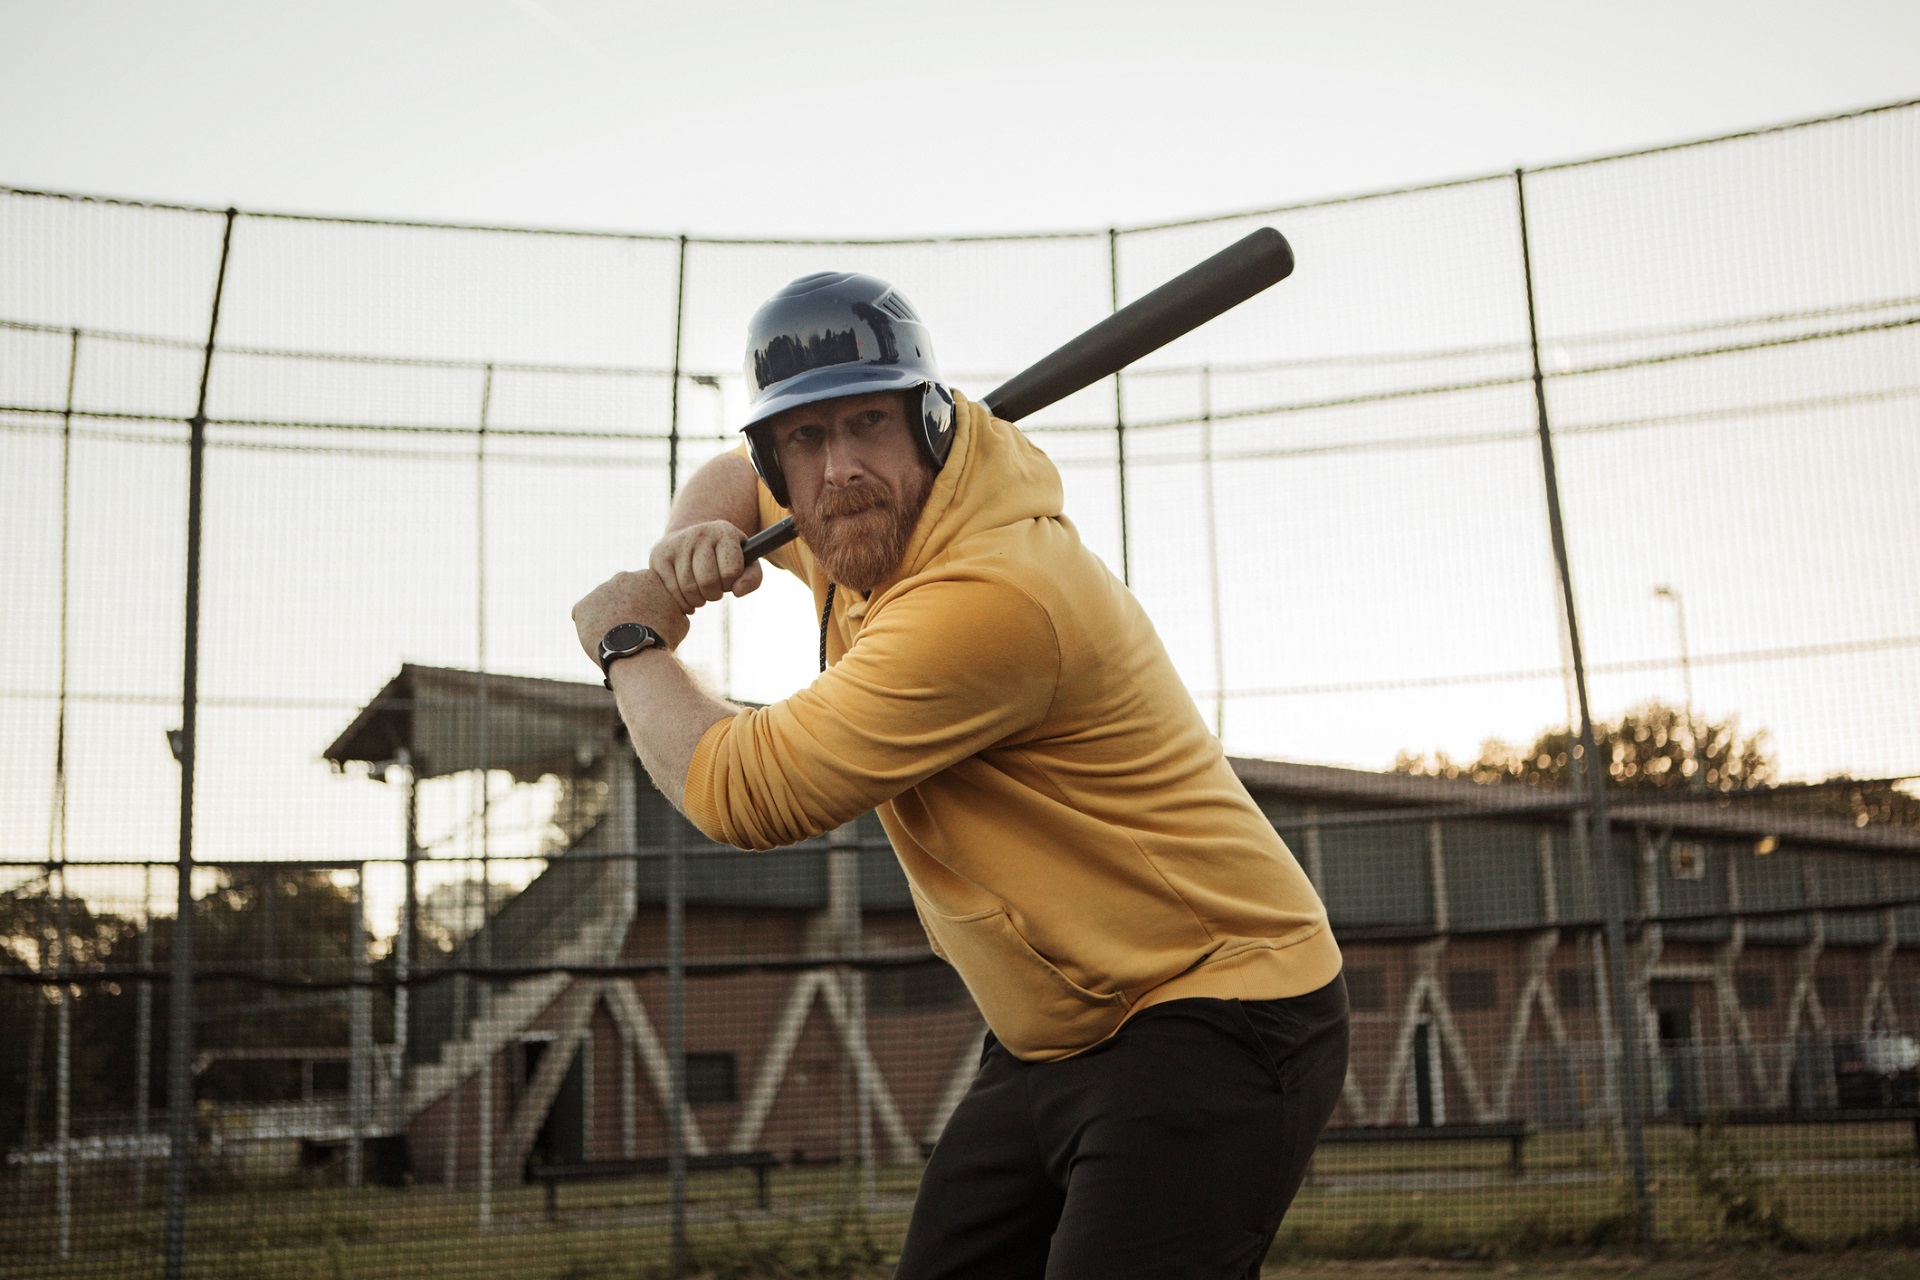 I Thought My Baseball Career Was Over: How Jersey Rehab Got Me Back in the Game